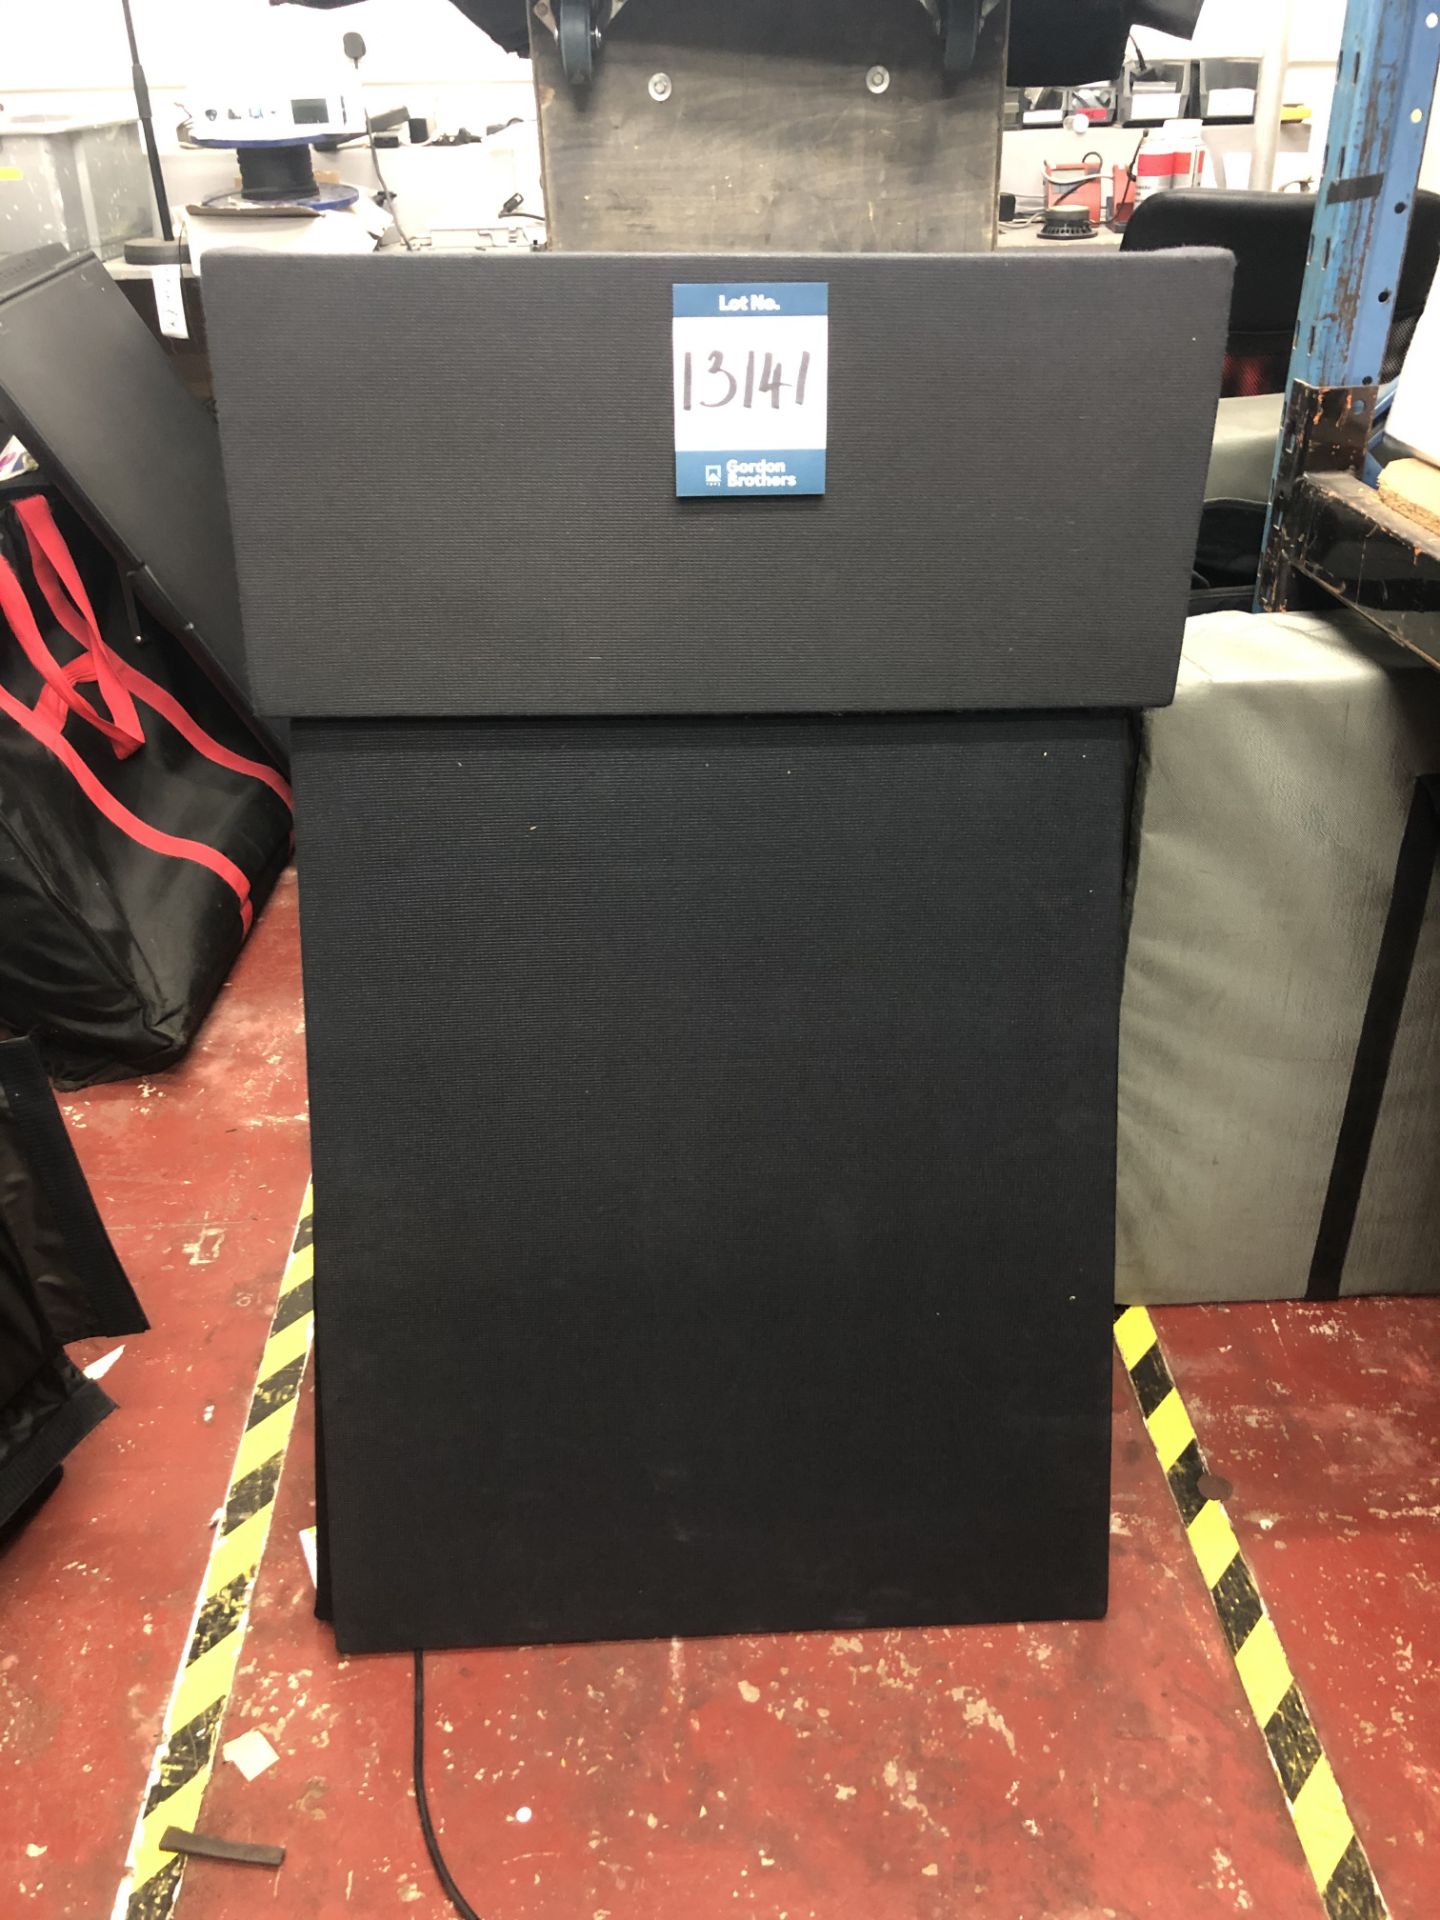 2x fabric covered conference lecterns, various col